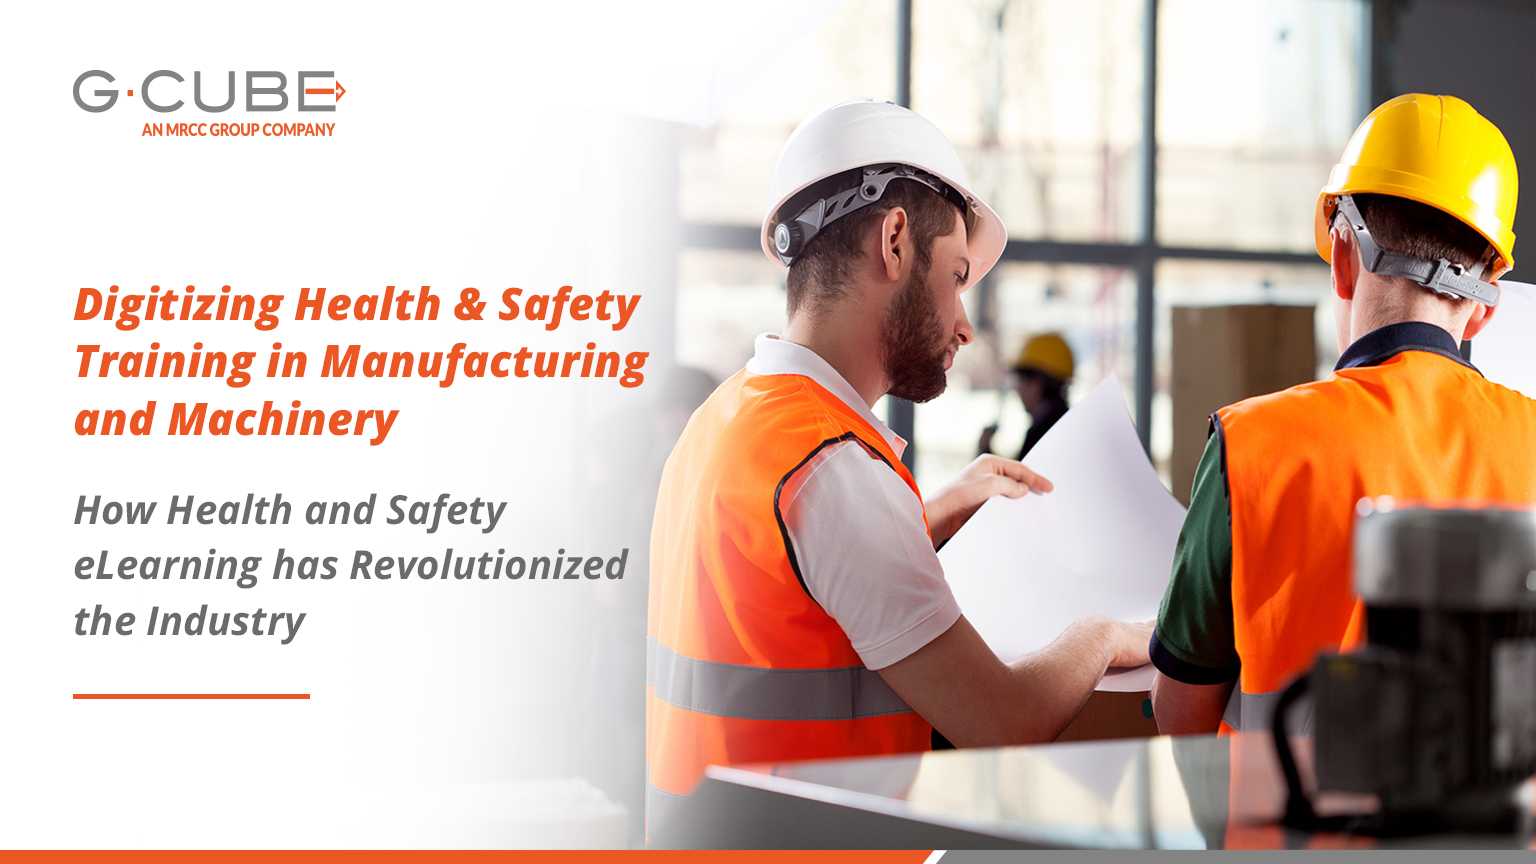 health and safety training